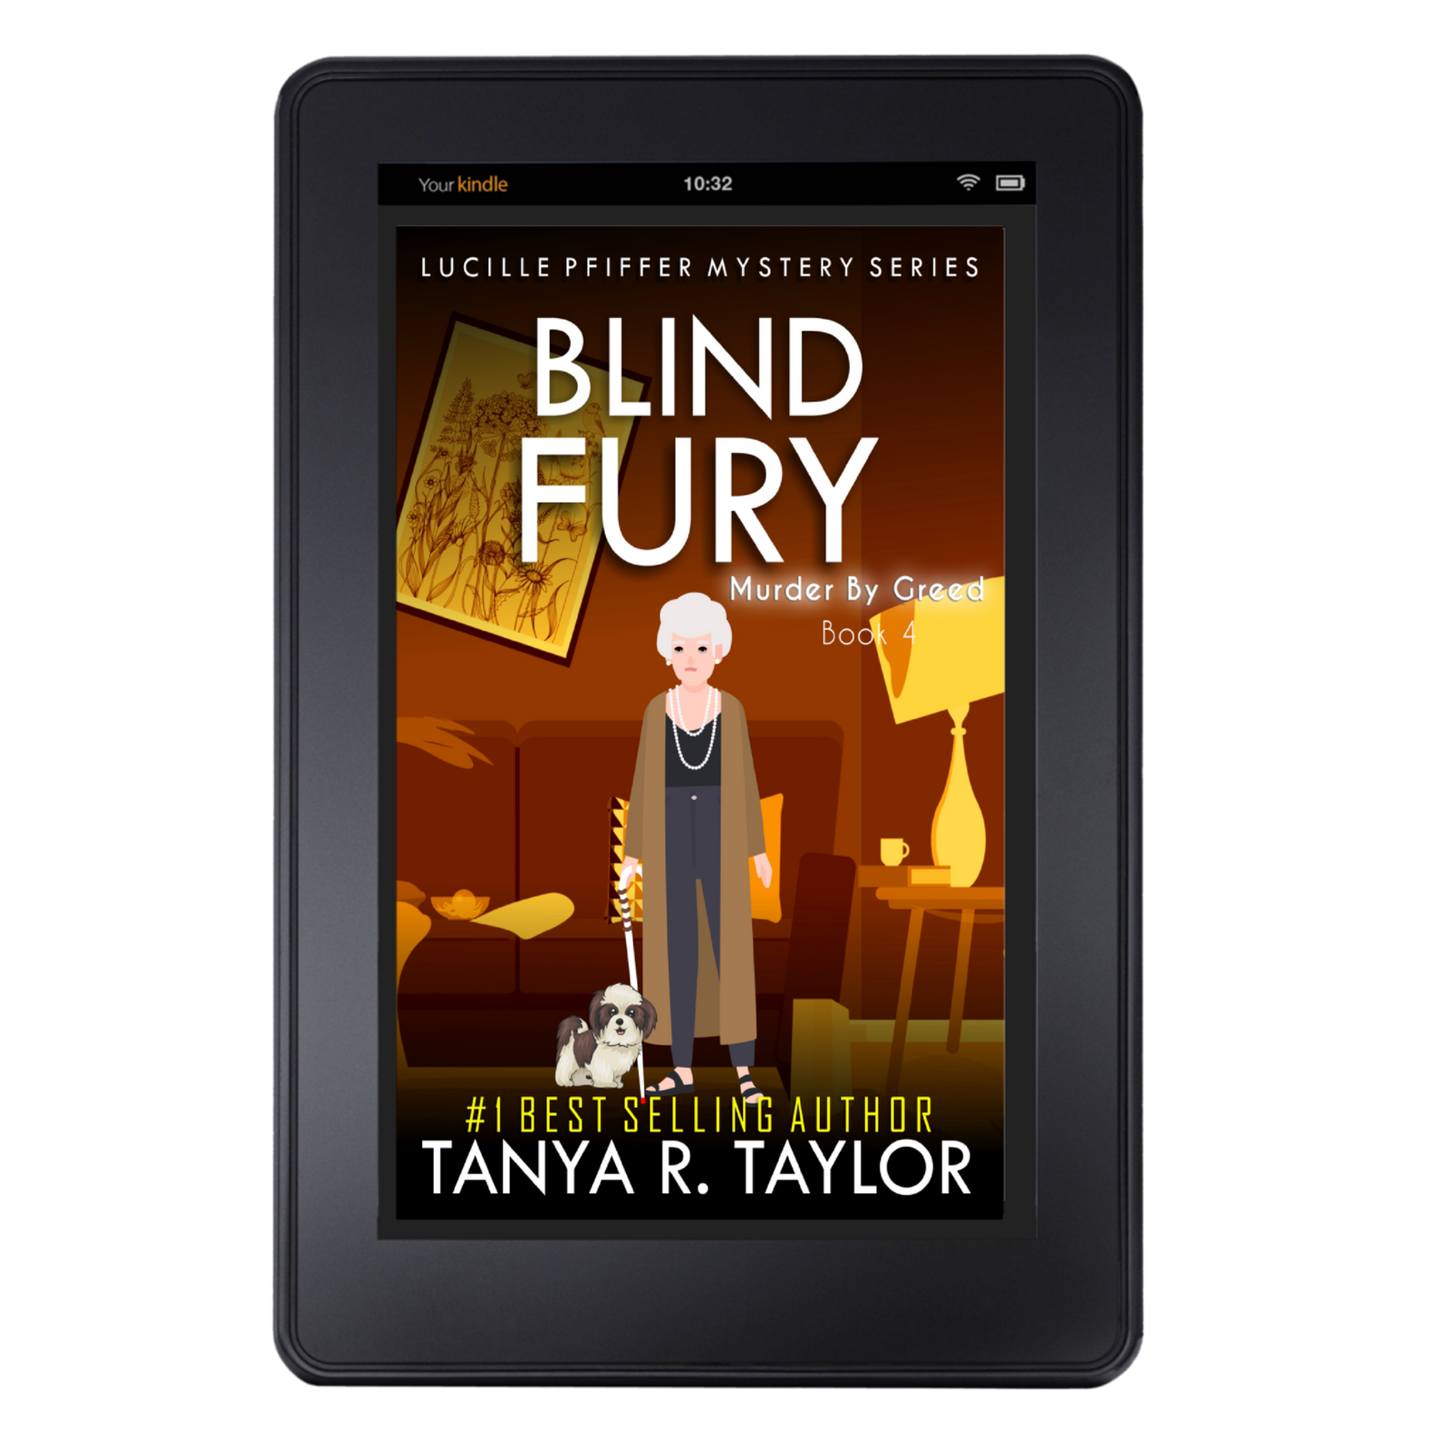 (Ebook) BLIND FURY: MURDER BY GREED (Lucille Pfiffer Mystery Series) Book 4